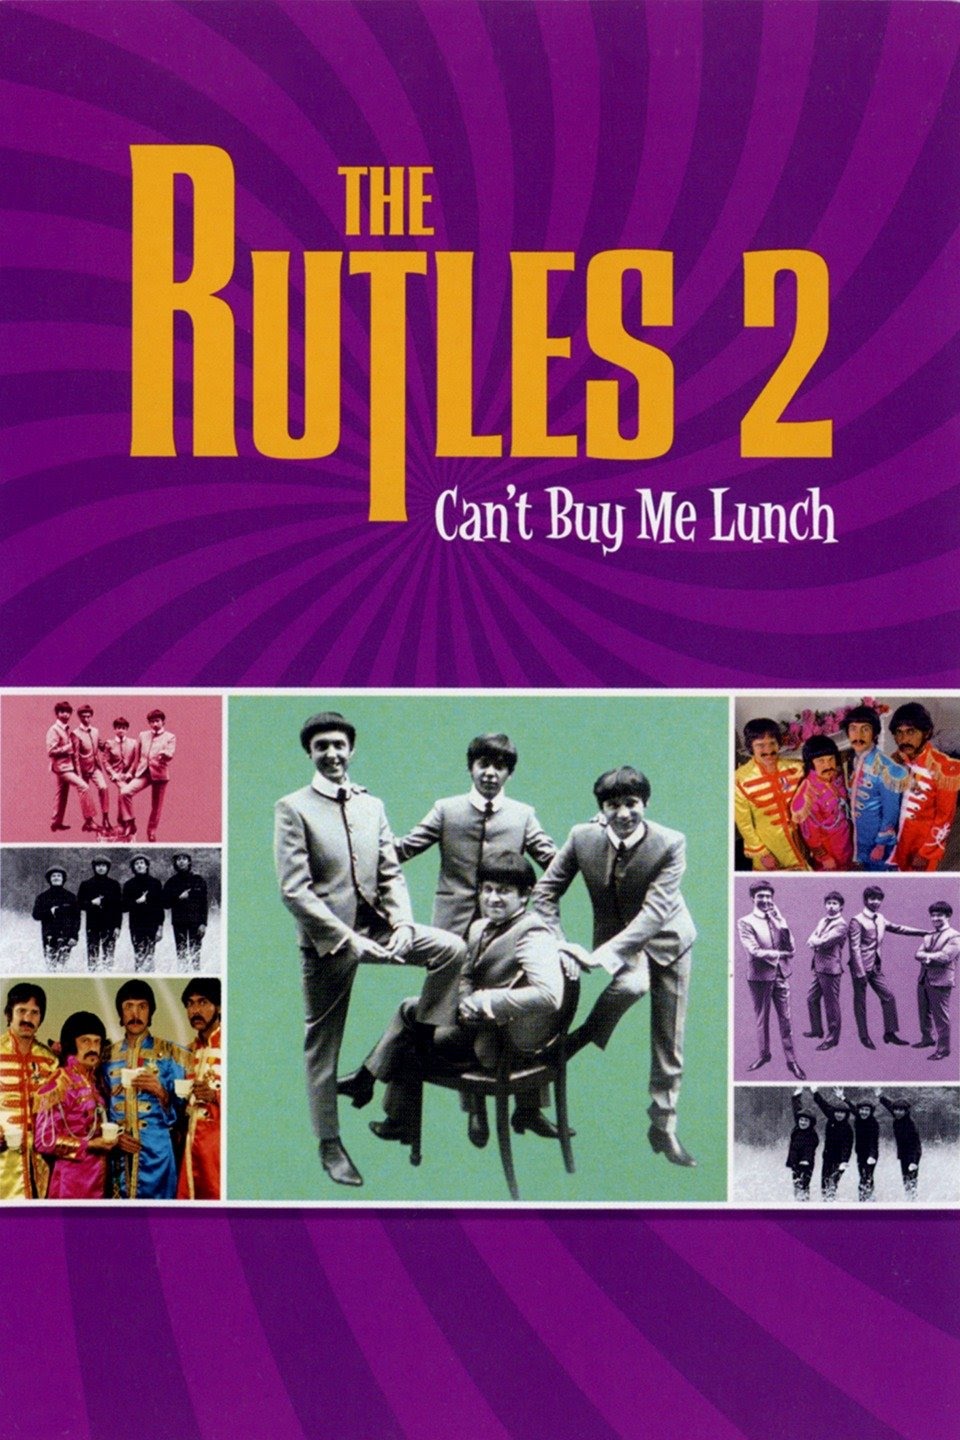 The Rutles 2: Can't Buy Me Lunch (2003) Screenshot 2